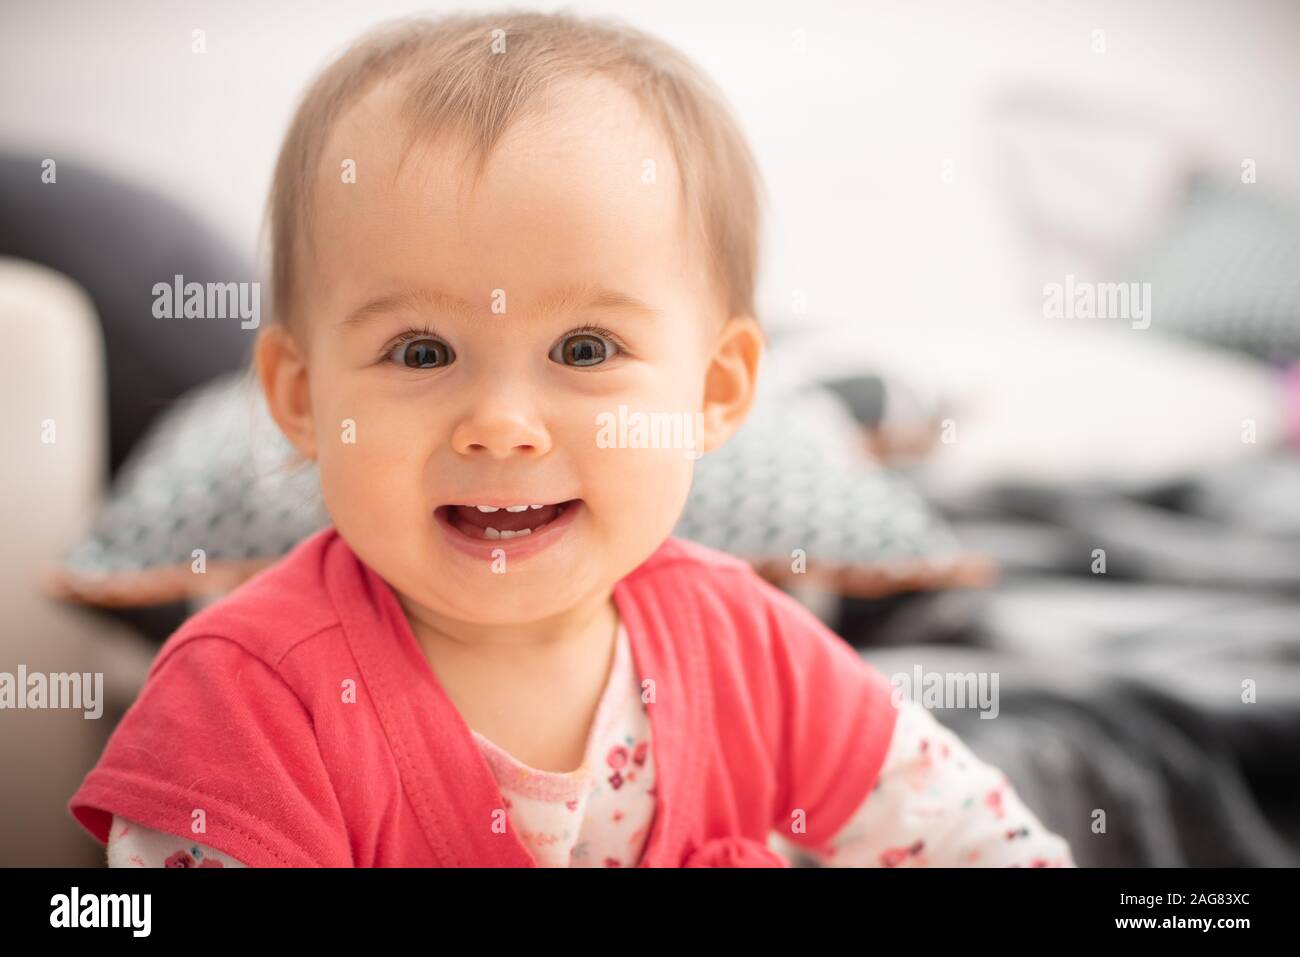 Cute 1 year old baby girl laughs into camera big brown eyes and wide smile with new teethes, concept of teething. Stock Photo